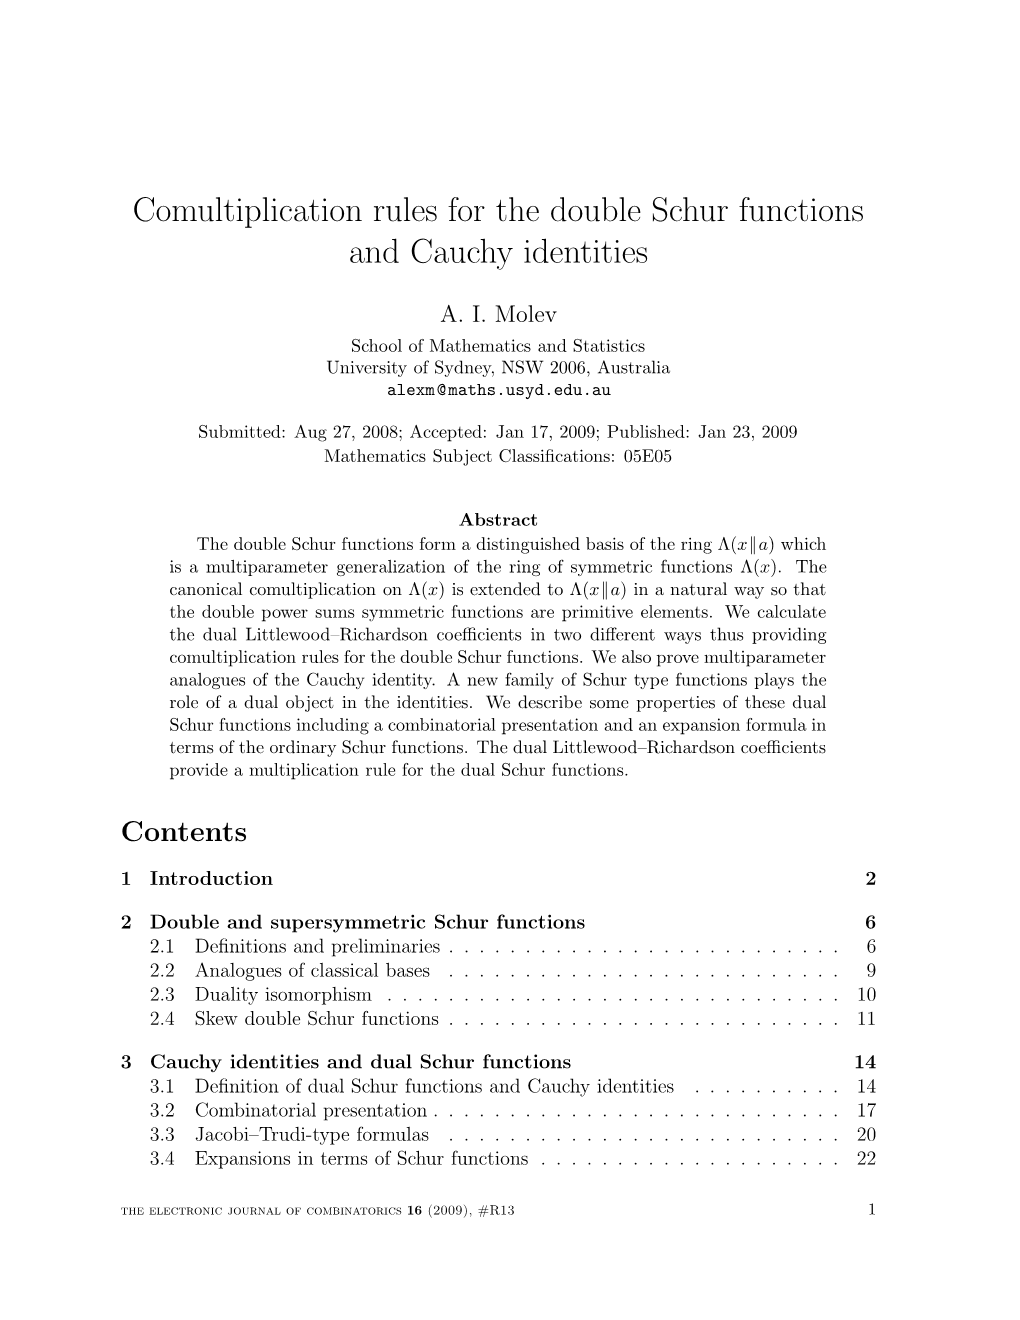 Comultiplication Rules for the Double Schur Functions and Cauchy Identities